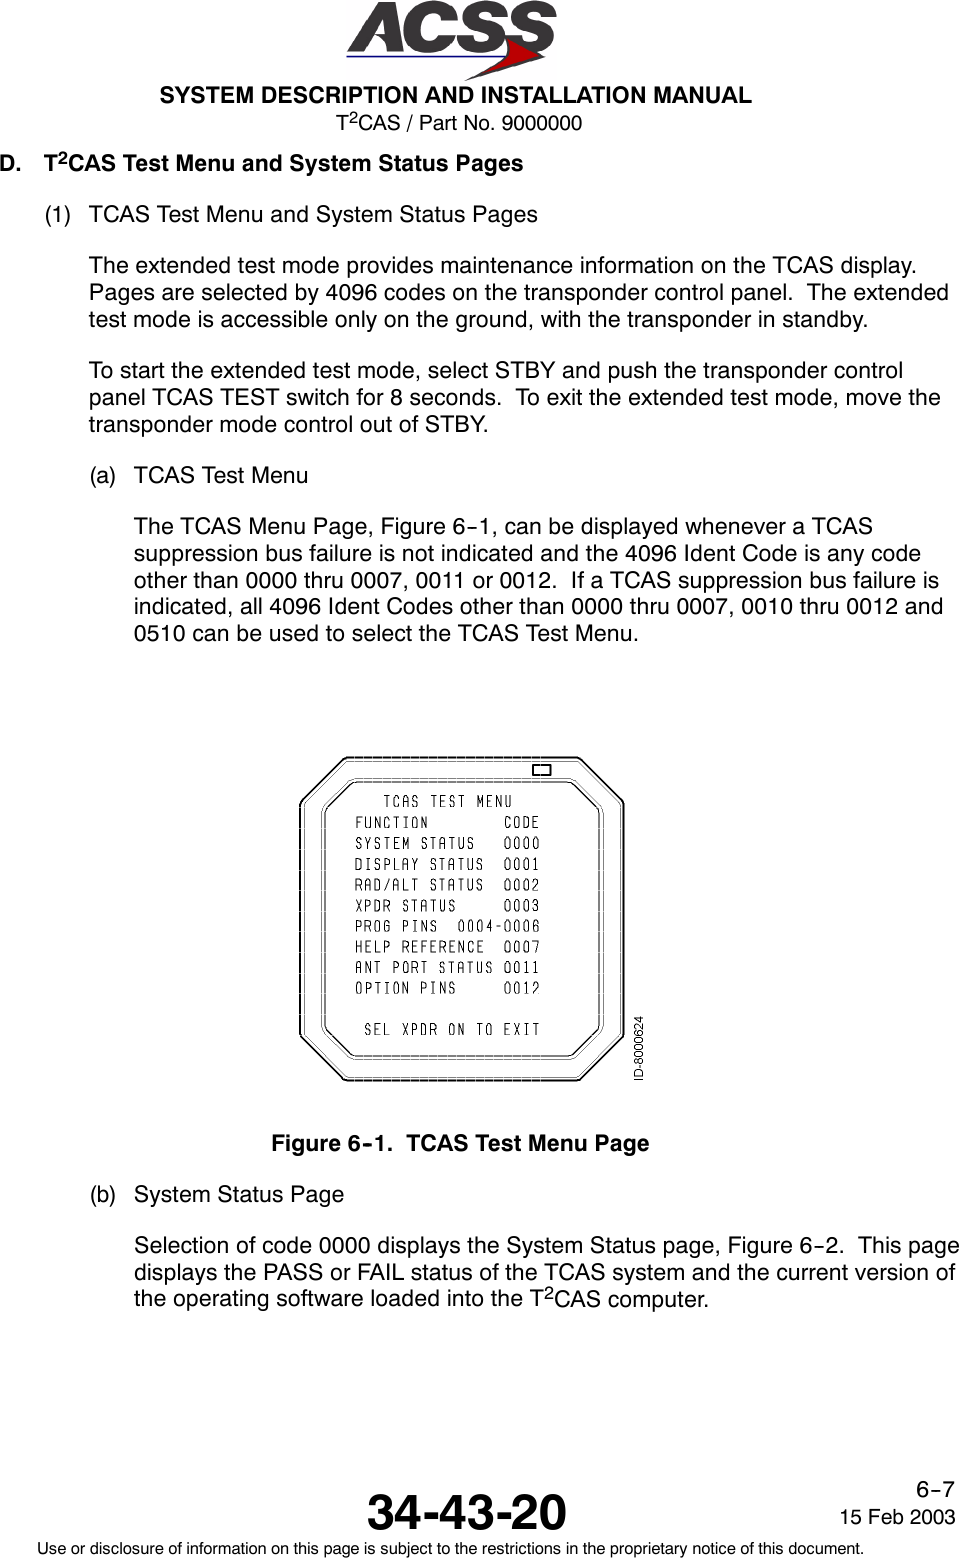 T2CAS / Part No. 9000000SYSTEM DESCRIPTION AND INSTALLATION MANUAL34-43-20 15 Feb 2003Use or disclosure of information on this page is subject to the restrictions in the proprietary notice of this document.6--7D. T2CAS Test Menu and System Status Pages(1) TCAS Test Menu and System Status PagesThe extended test mode provides maintenance information on the TCAS display.Pages are selected by 4096 codes on the transponder control panel. The extendedtest mode is accessible only on the ground, with the transponder in standby.To start the extended test mode, select STBY and push the transponder controlpanel TCAS TEST switch for 8 seconds. To exit the extended test mode, move thetransponder mode control out of STBY.(a) TCAS Test MenuThe TCAS Menu Page, Figure 6--1, can be displayed whenever a TCASsuppression bus failure is not indicated and the 4096 Ident Code is any codeother than 0000 thru 0007, 0011 or 0012. If a TCAS suppression bus failure isindicated, all 4096 Ident Codes other than 0000 thru 0007, 0010 thru 0012 and0510 can be used to select the TCAS Test Menu.Figure 6--1. TCAS Test Menu Page(b) System Status PageSelection of code 0000 displays the System Status page, Figure 6--2. This pagedisplays the PASS or FAIL status of the TCAS system and the current version ofthe operating software loaded into the T2CAS computer.